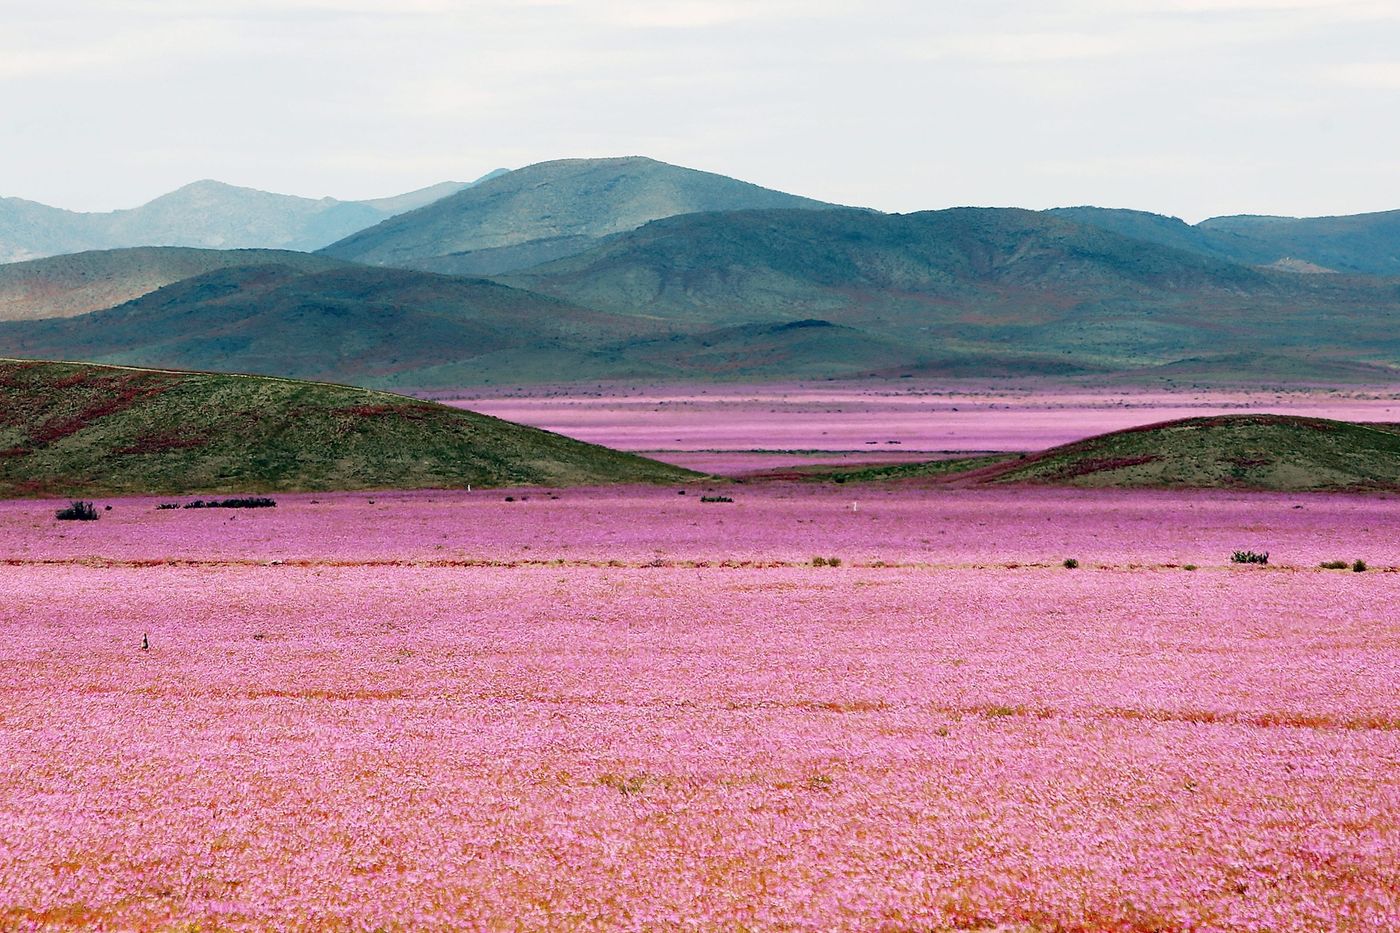 The usually dry Atacama Desert is currently covered in pink flowers.